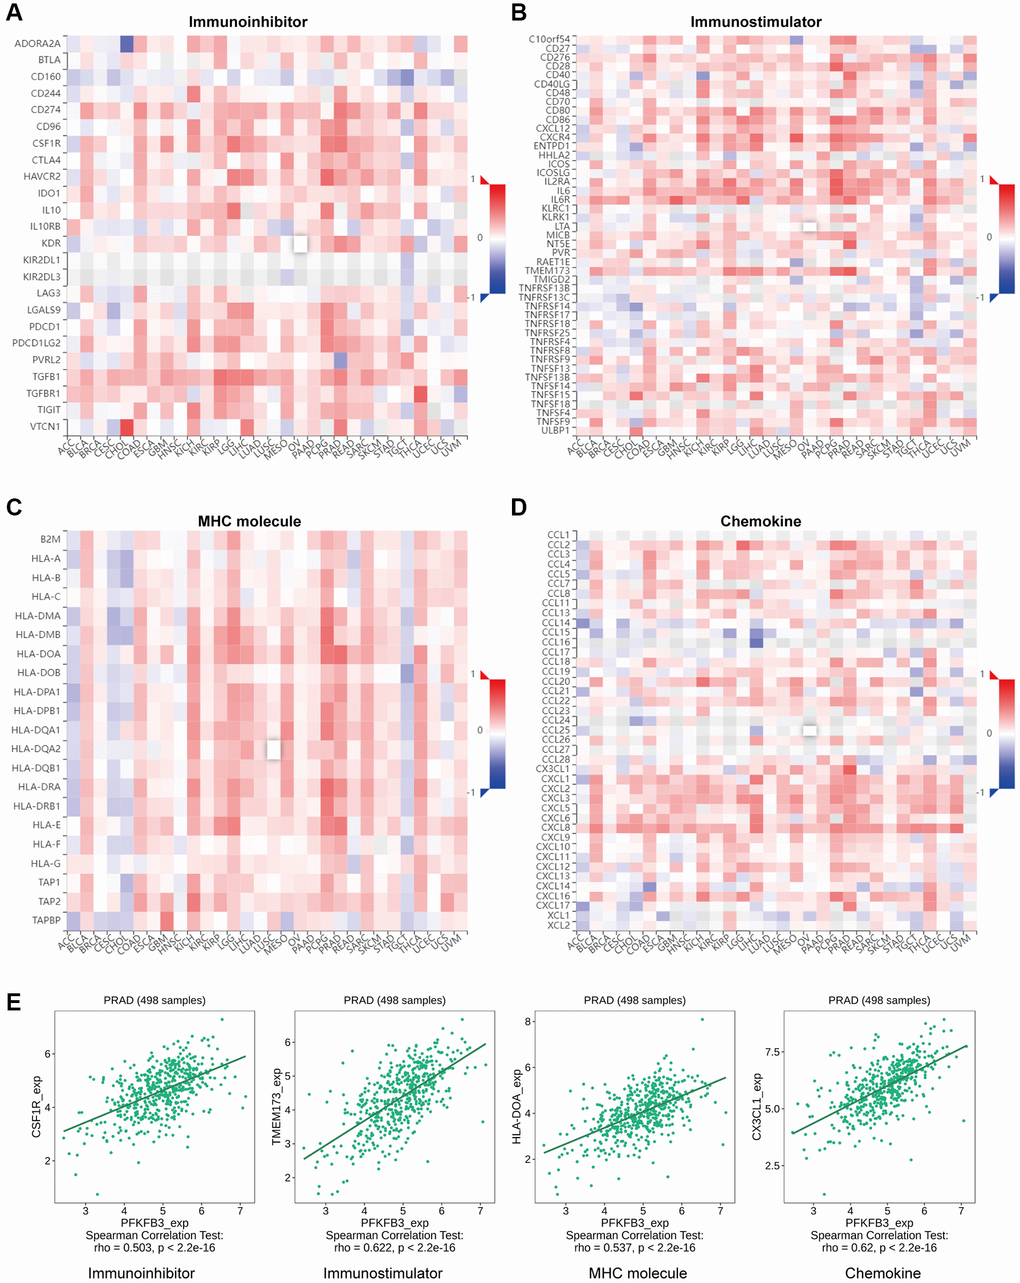 The association between PFKFB3 gene mutation and immune regulators in pan-cancer. The heatmaps about the relationship between PFKFB3 expression and immune markers: (A) immunoinhibitory factors; (B) immunostimulatory factors; (C) MHC molecule; (D) Chemokine. (E) The expression of PFKFB3 correlated with corresponding immune markers (CSF1R, TMEM173, HLA-DOA, and CX3CL1) in PRAD.